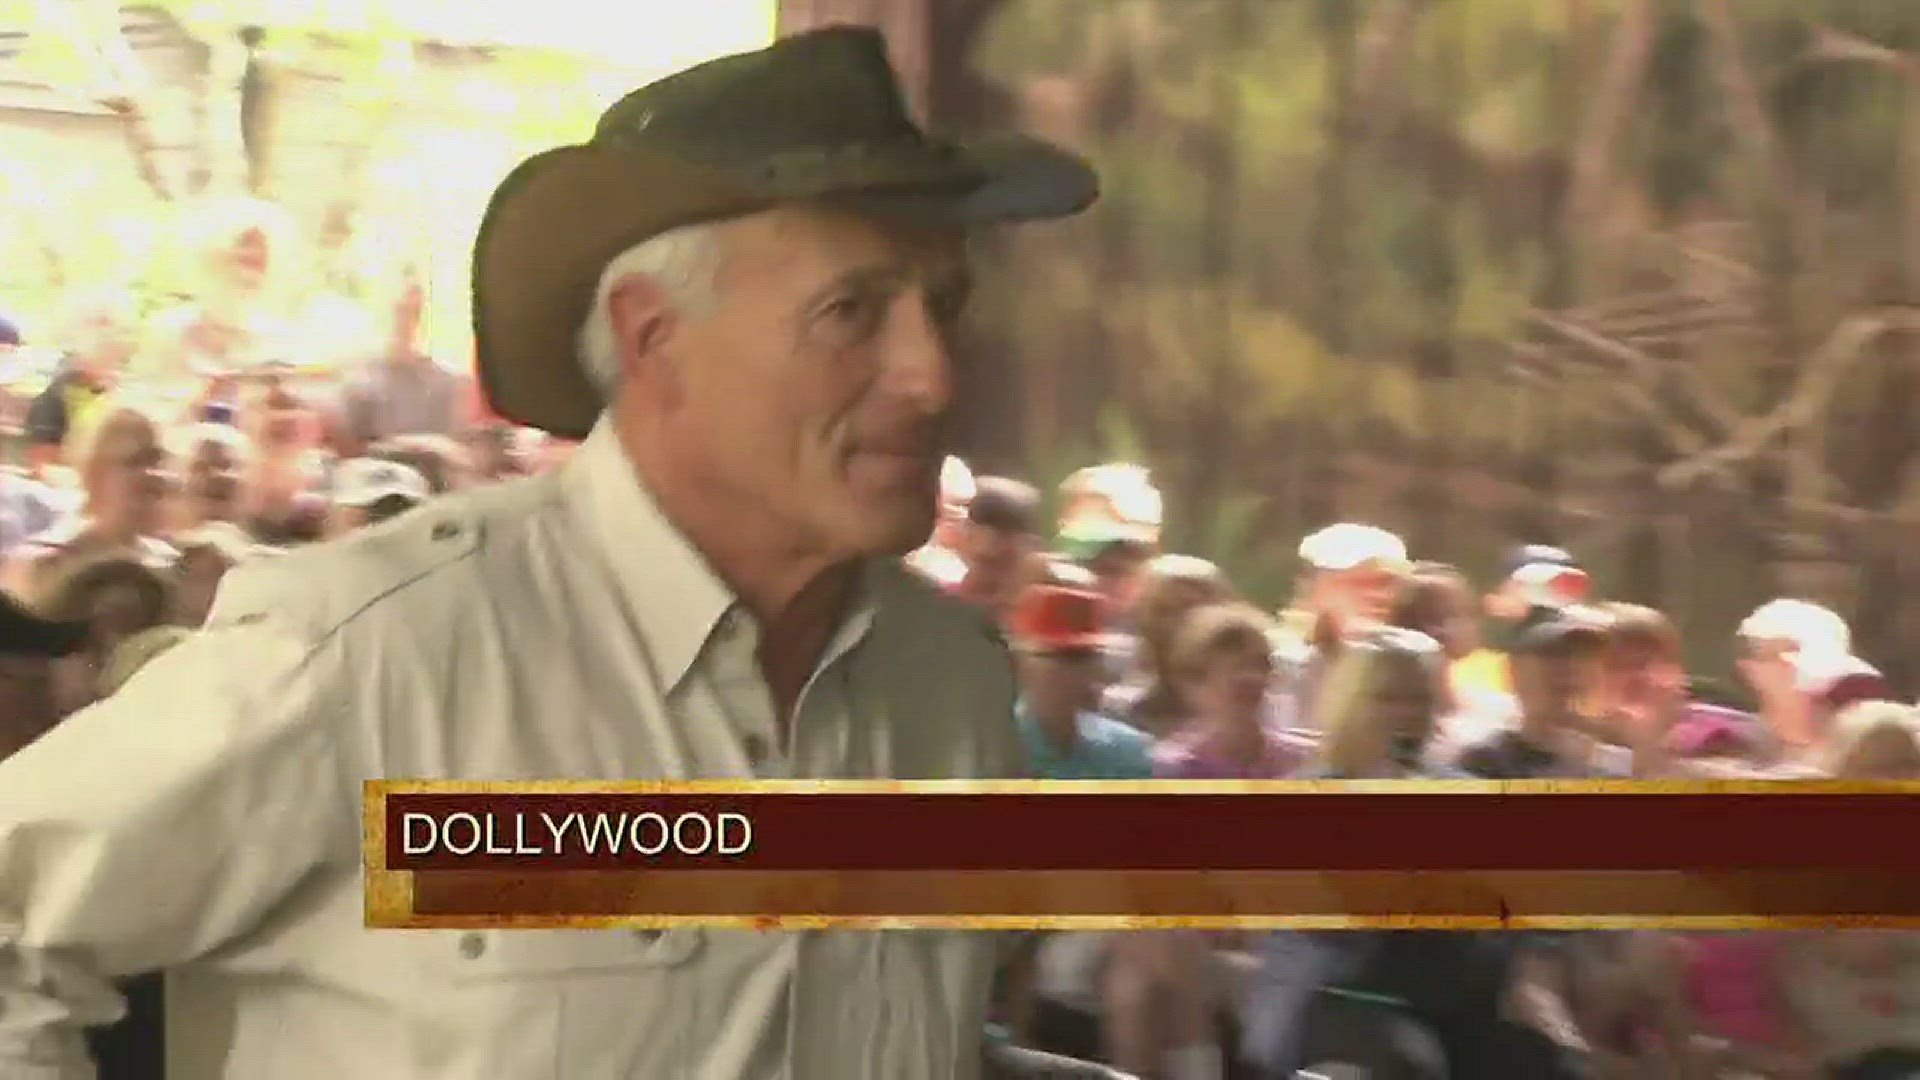 Animal lover and celebrity Jack Hanna was at Dollywood on Tuesday